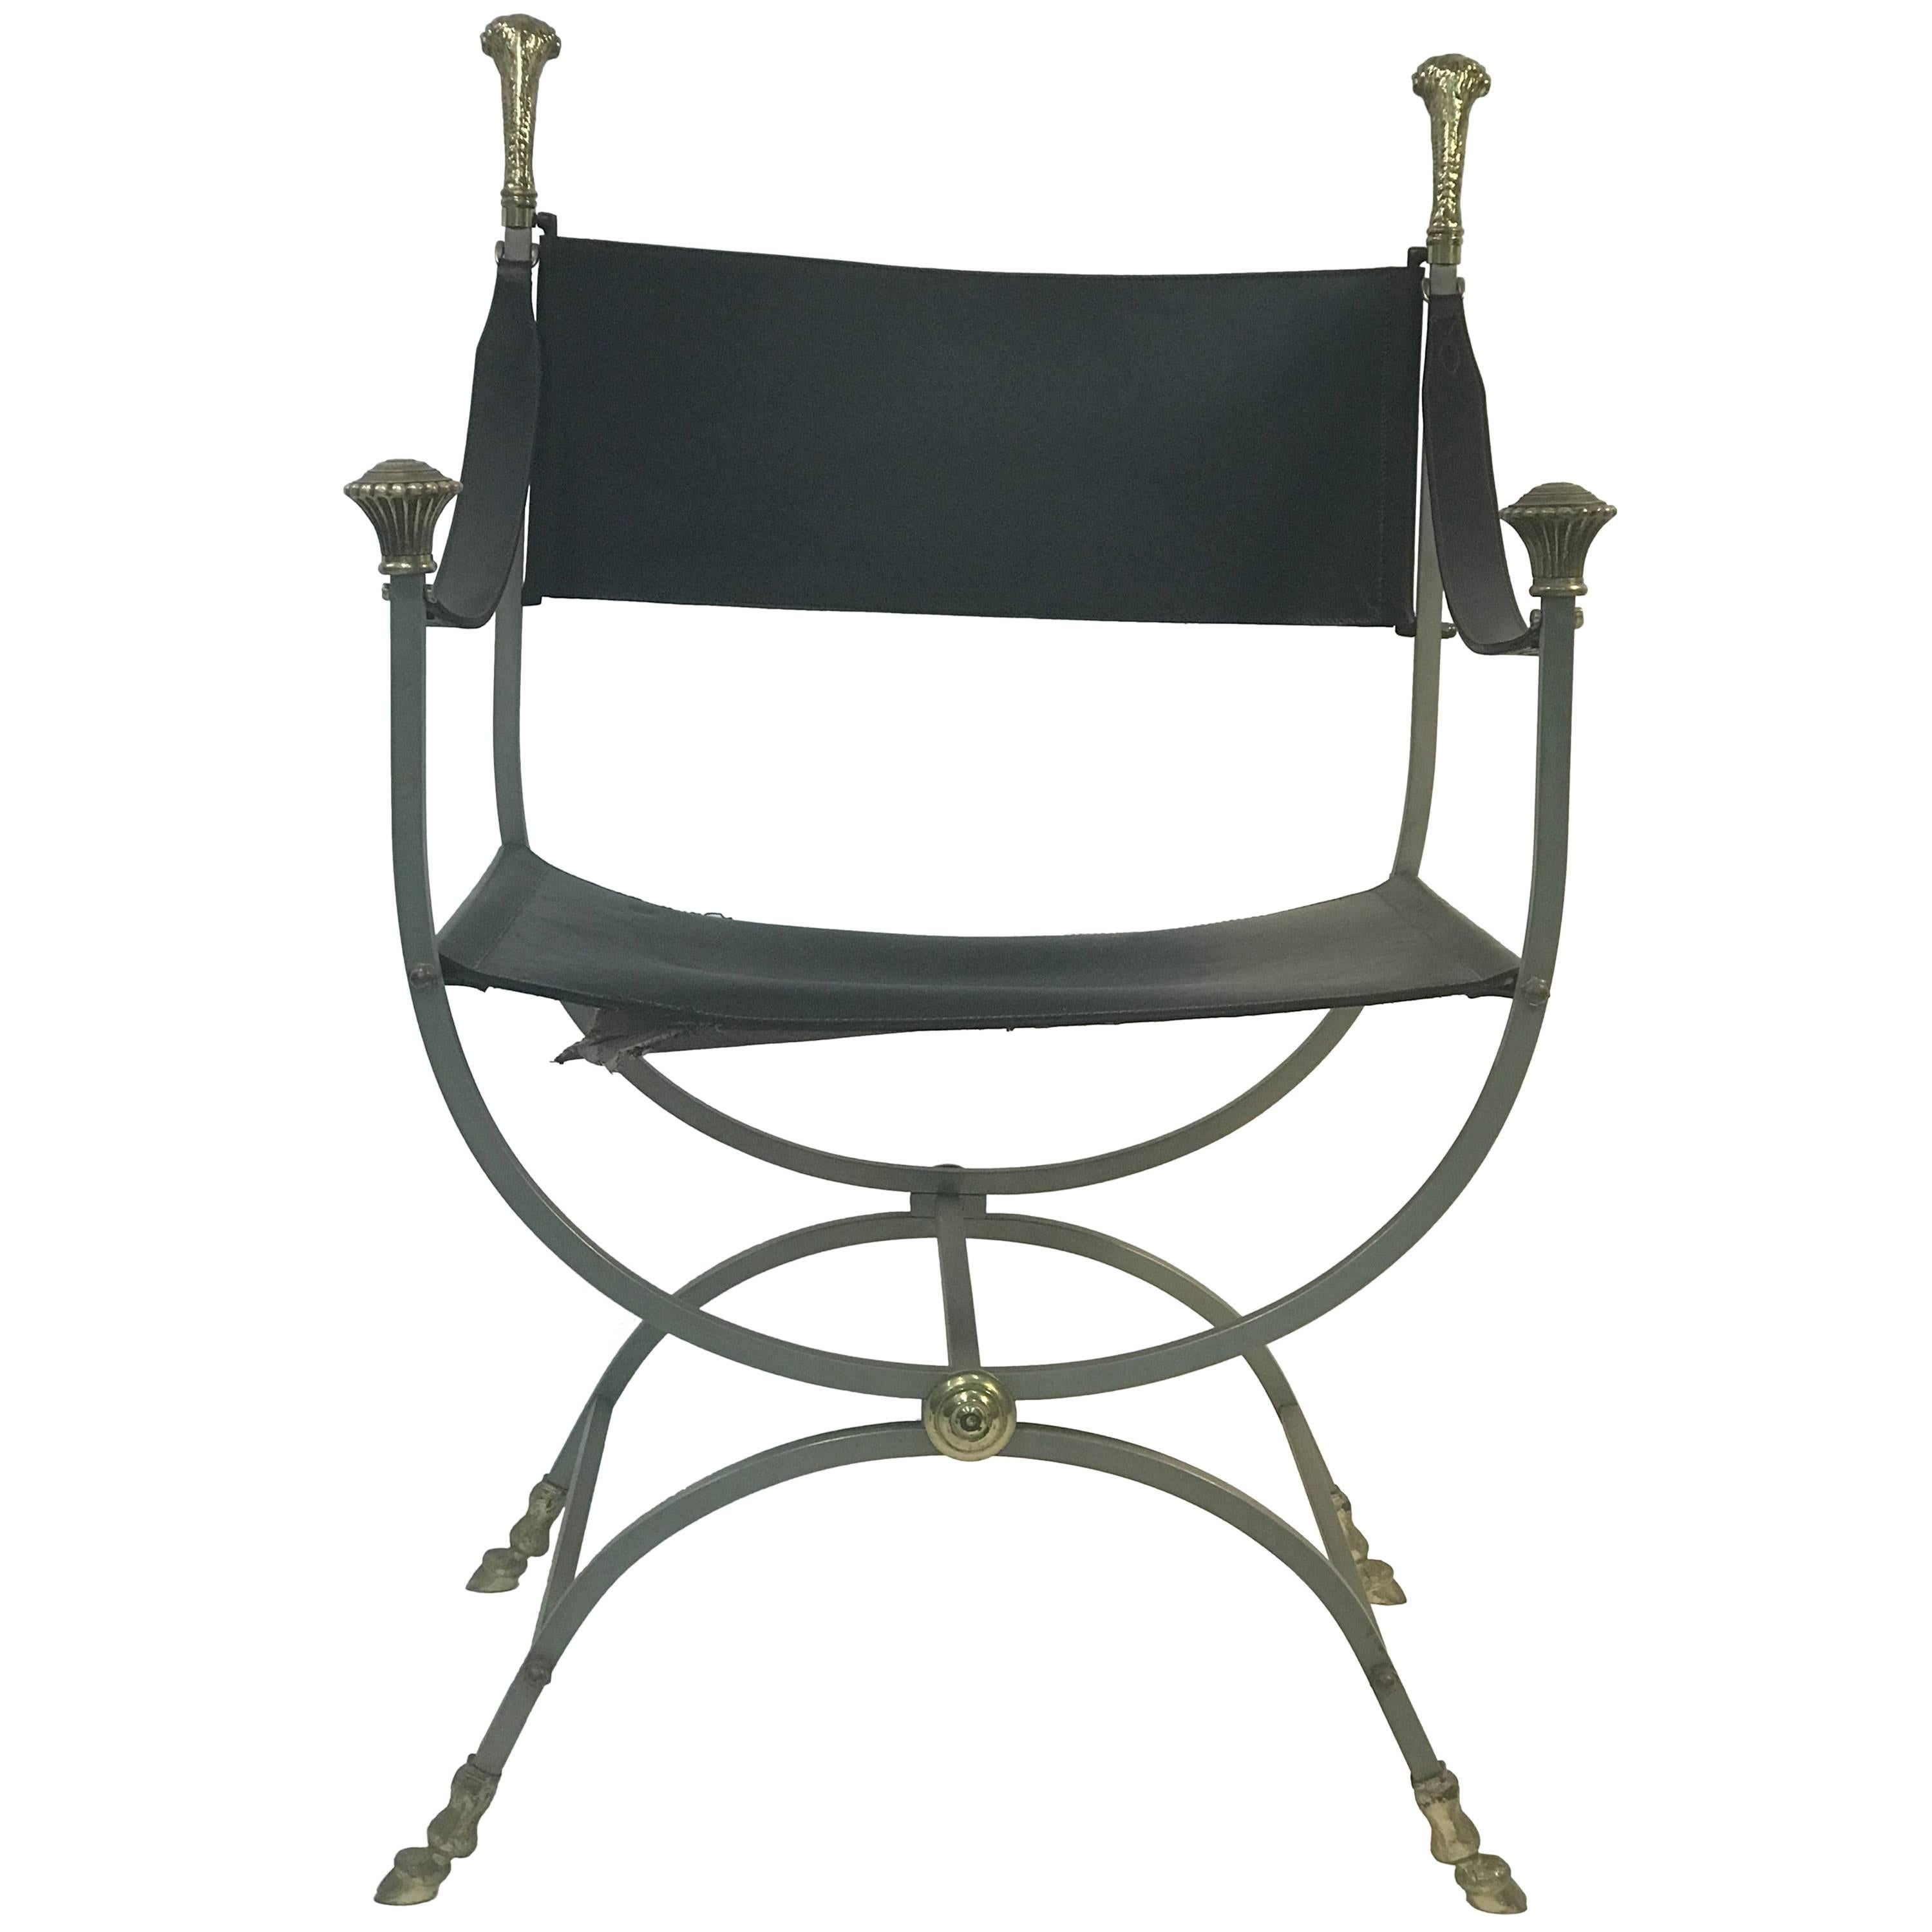 Striking Steel and Brass Black Leather Chair with Ram's Head Design by Jansen For Sale